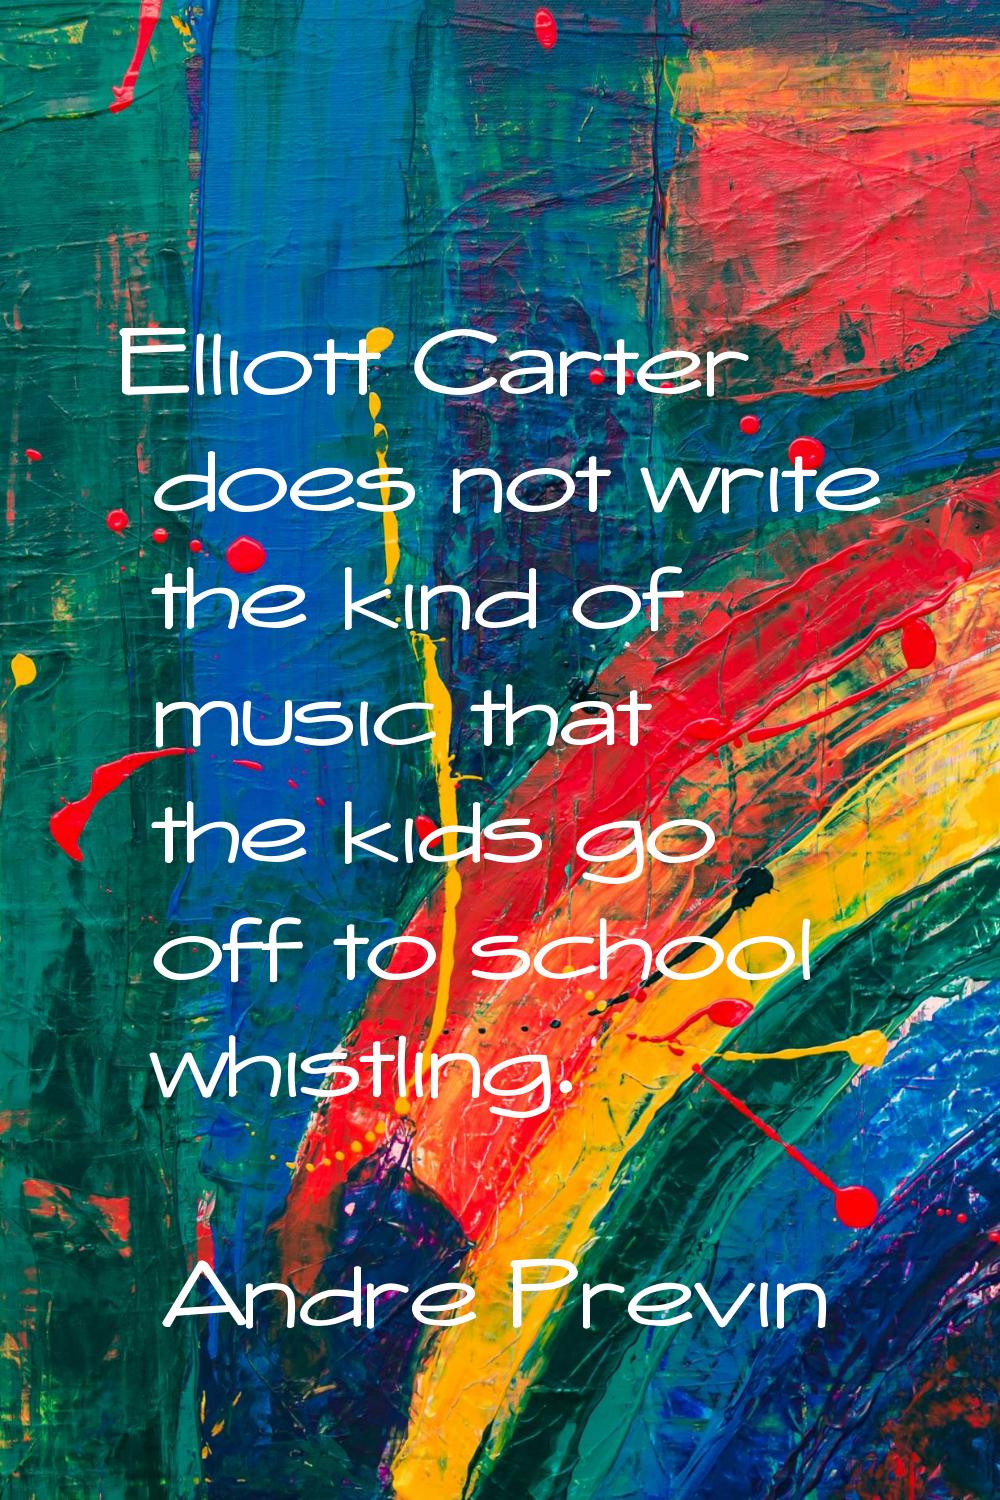 Elliott Carter does not write the kind of music that the kids go off to school whistling.